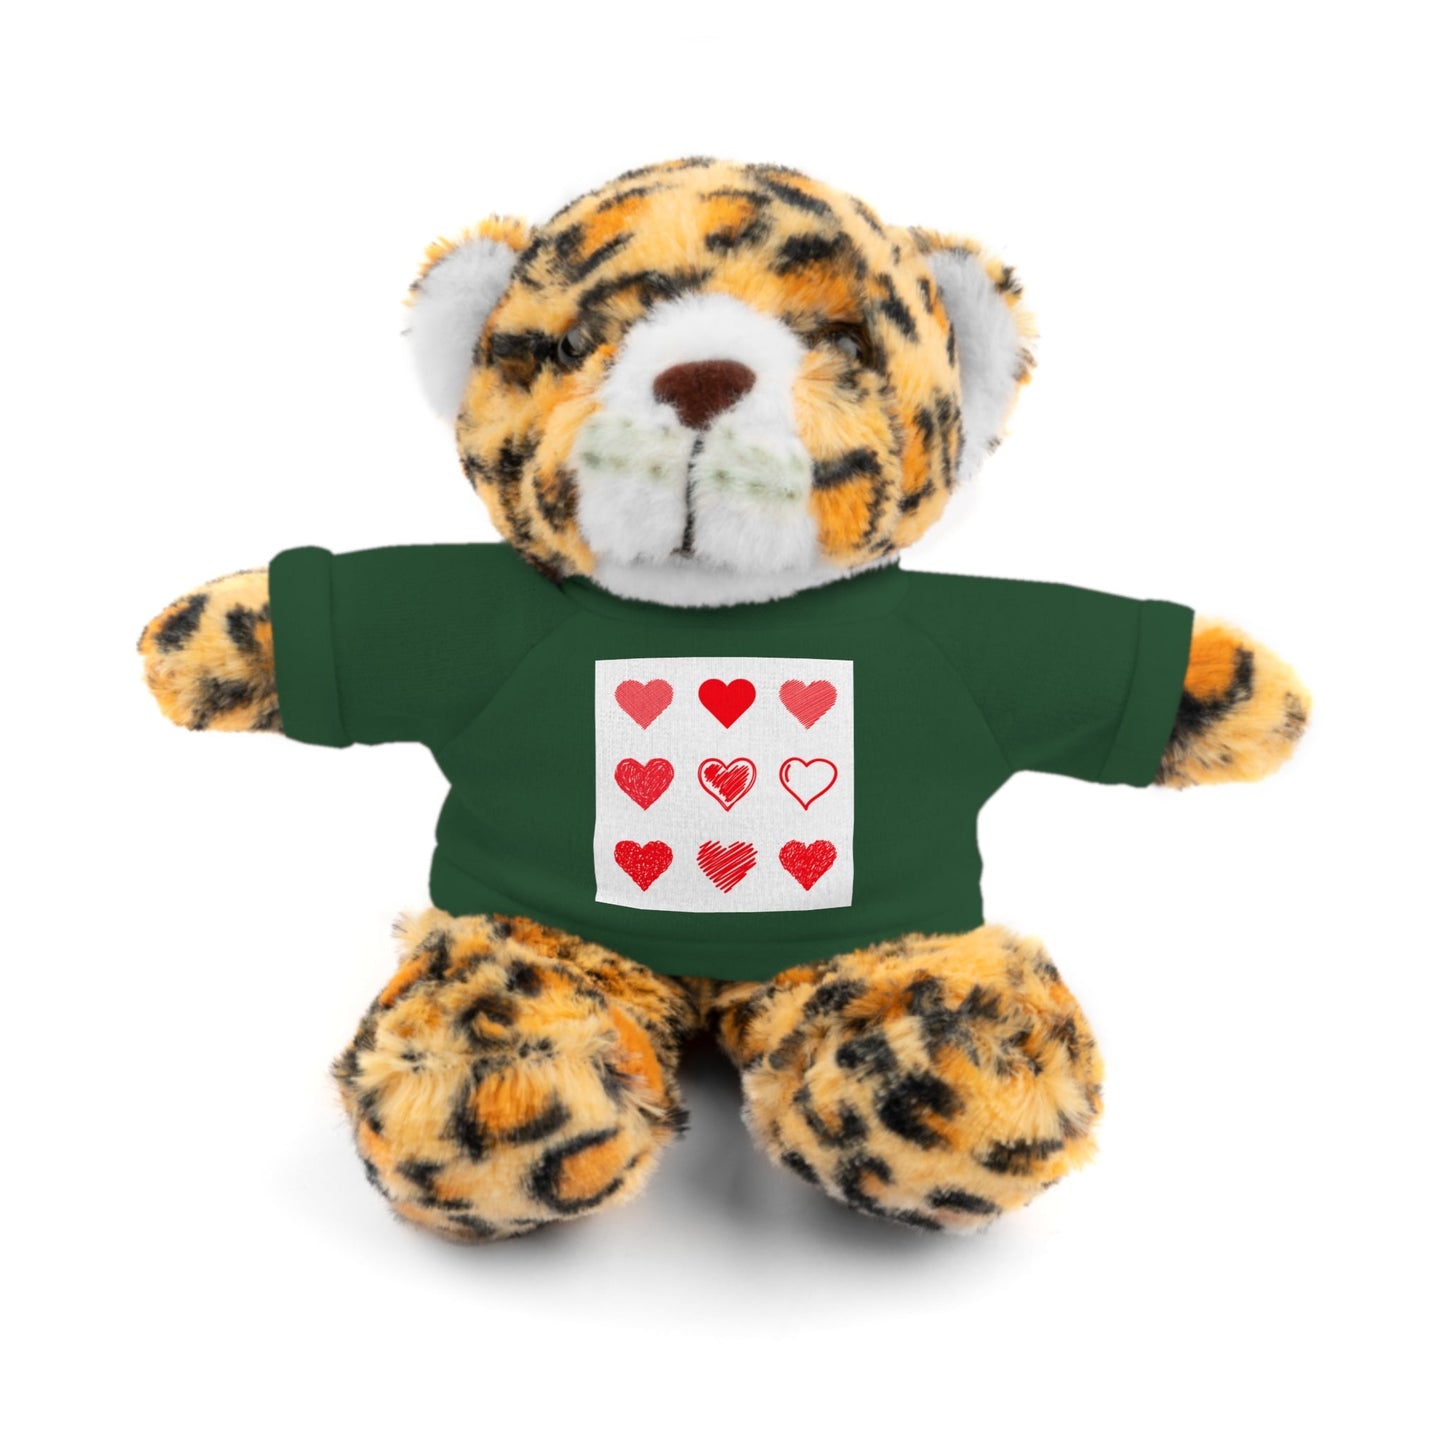 Accessories - Stuffed Animals With Tee